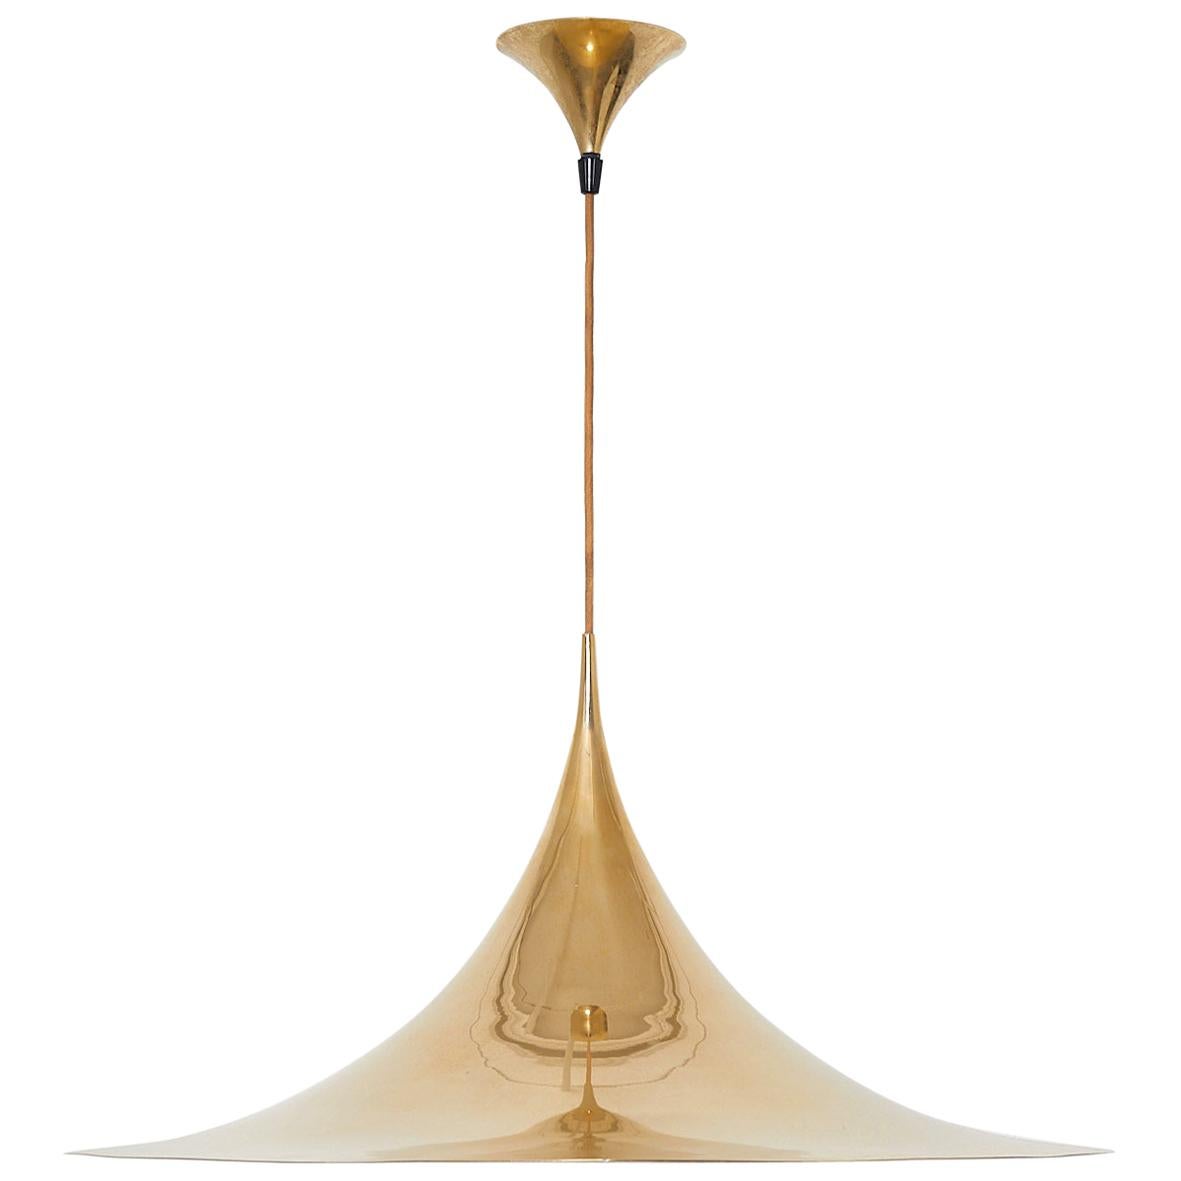 Gold Plated "Semi" Lamp by Claus Bonderup and Thorsten Thorup, Fog&Morup, 1967